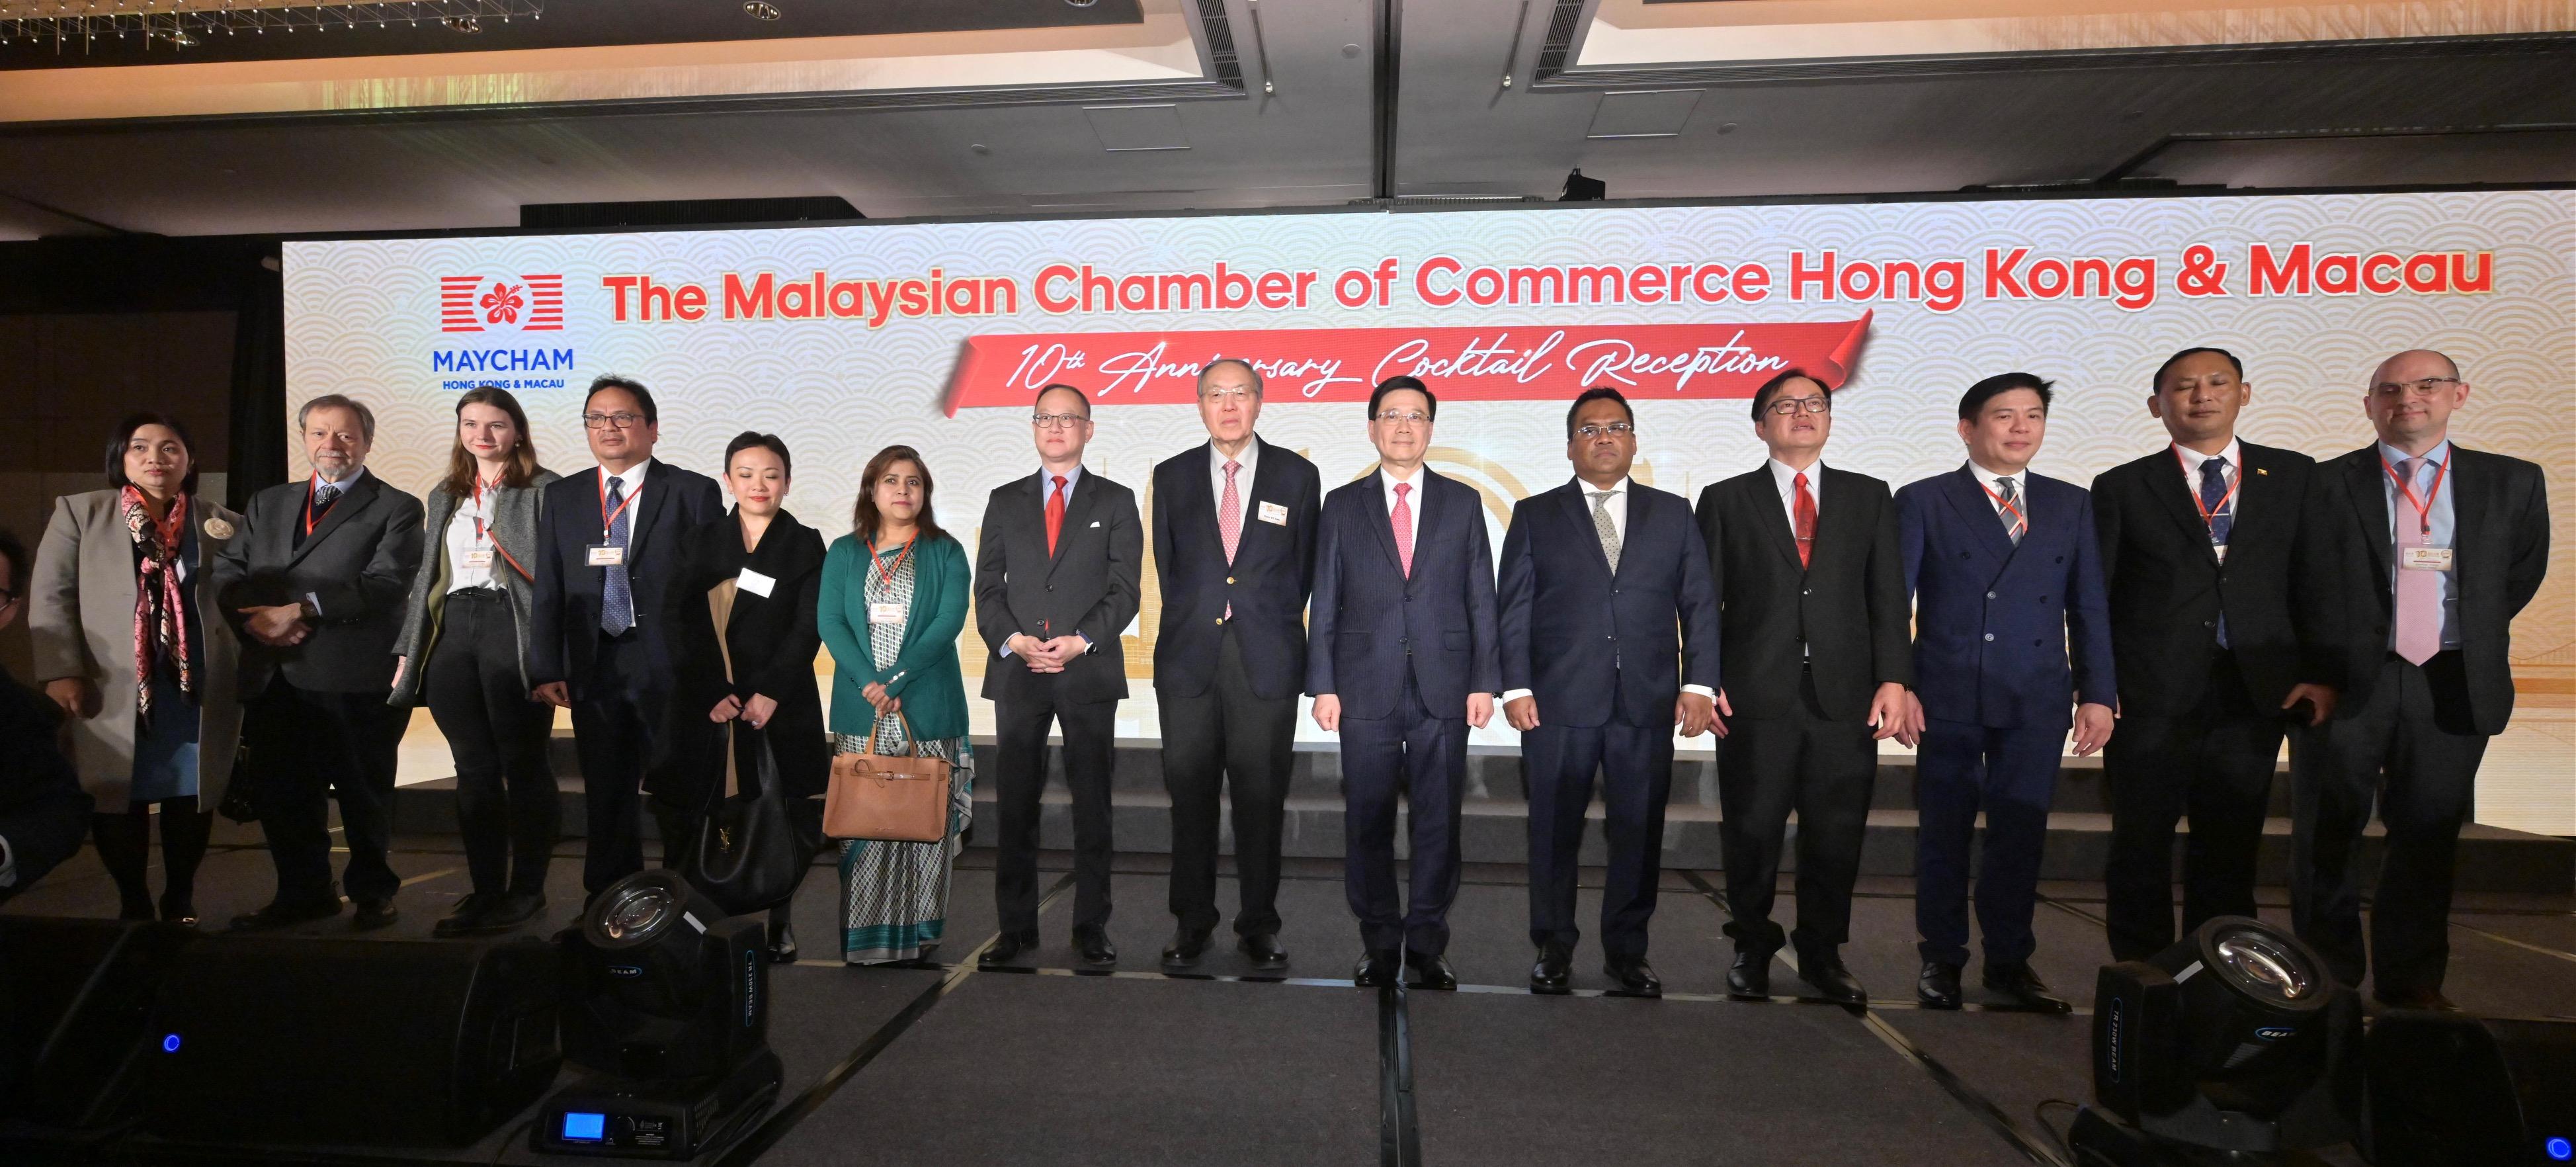 The Chief Executive, Mr John Lee, attended the Malaysian Chamber of Commerce Hong Kong & Macau 10th Anniversary Cocktail Reception today (January 25). Photo shows (from fourth right) the Consul-General of Malaysia in Hong Kong, Mr Muzambli Markam; the Ambassador of Malaysia to the People's Republic of China, Dato' Norman Muhamad; Mr Lee; the Chairman of the Malaysian Chamber of Commerce (Hong Kong & Macau), Dato' Gan Khai Choon; and other guests at the reception.